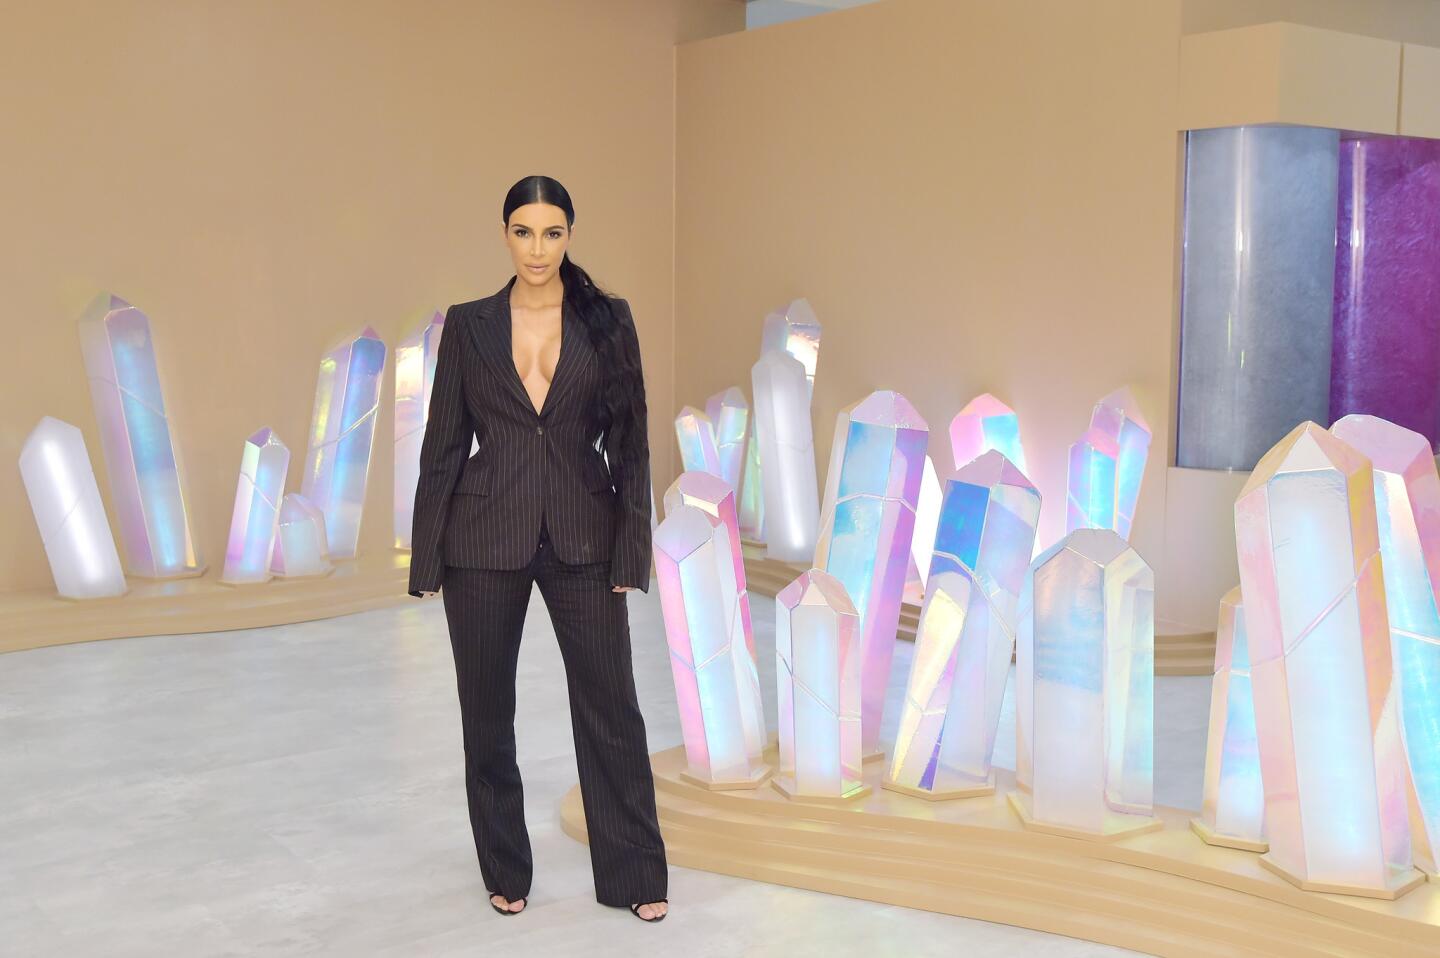 Kim Kardashian West attends the KKW Beauty and Fragrance pop-up at South Coast Plaza on Dec. 4, 2018, in Costa Mesa.